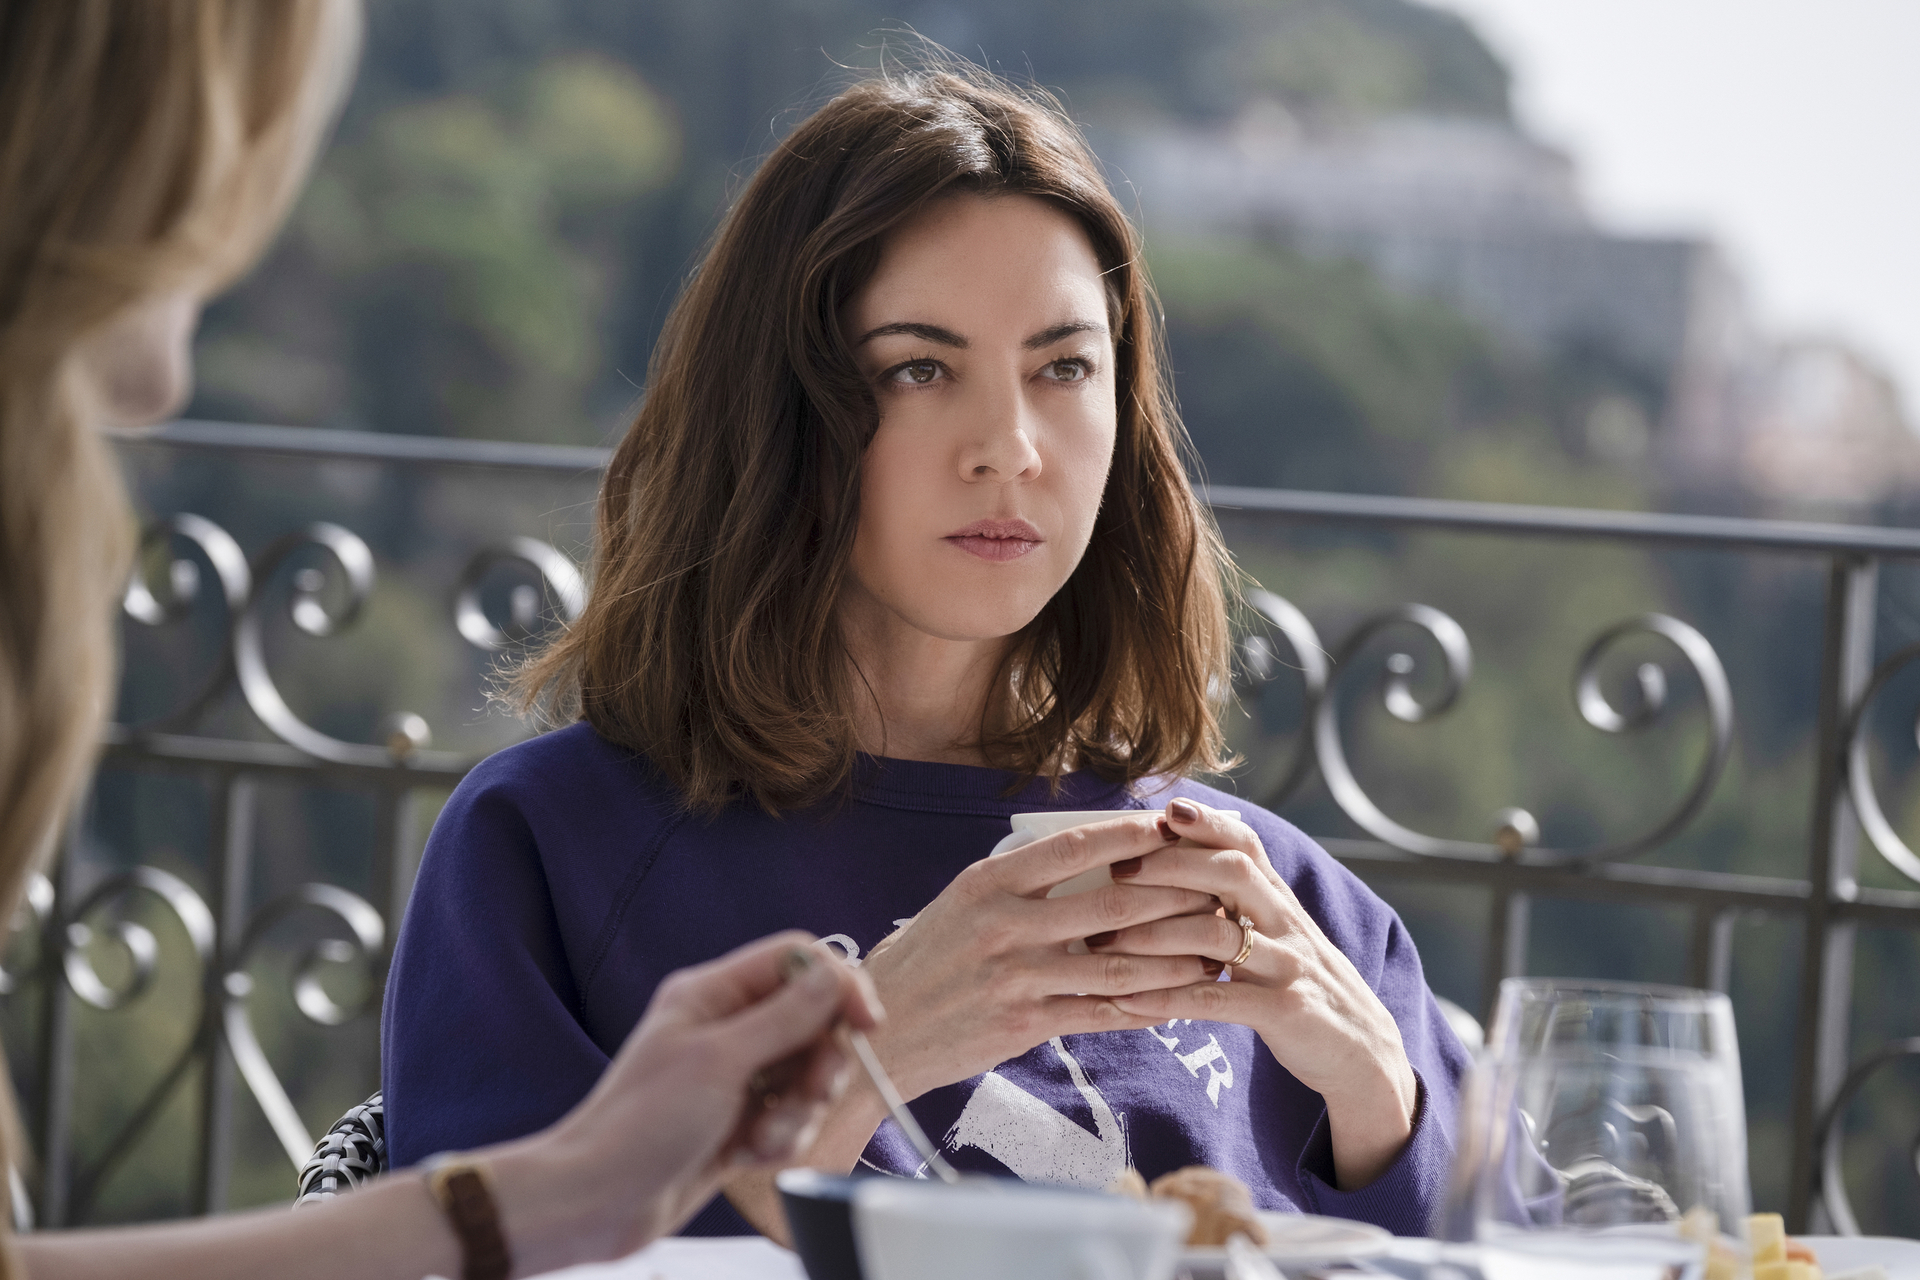 Aubrey Plaza holding a cup of coffee in a scene from The White Lotus